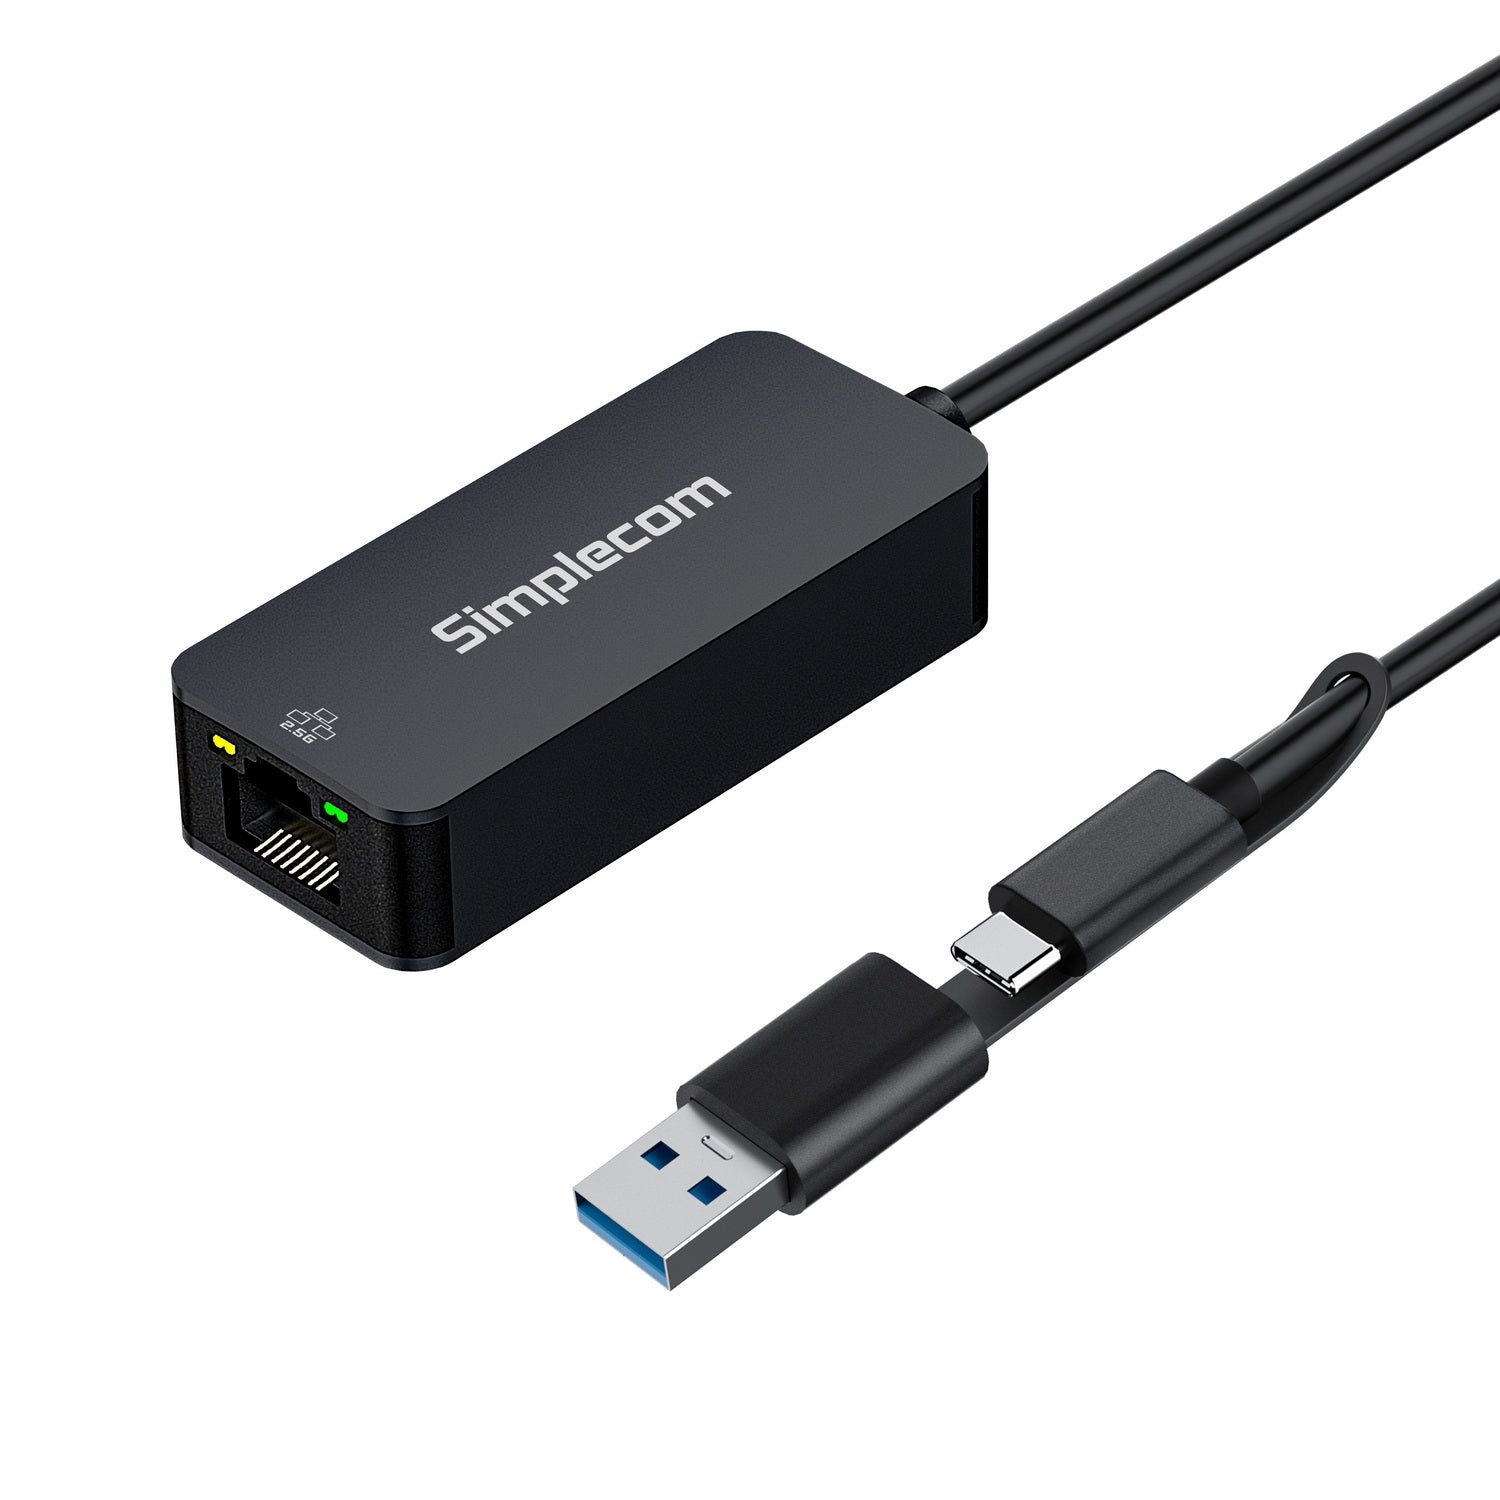 Aluminum USB-C and USB-A Network Adapter for 2.5G Ethernet at SuperSpeed of 2.5Gbps